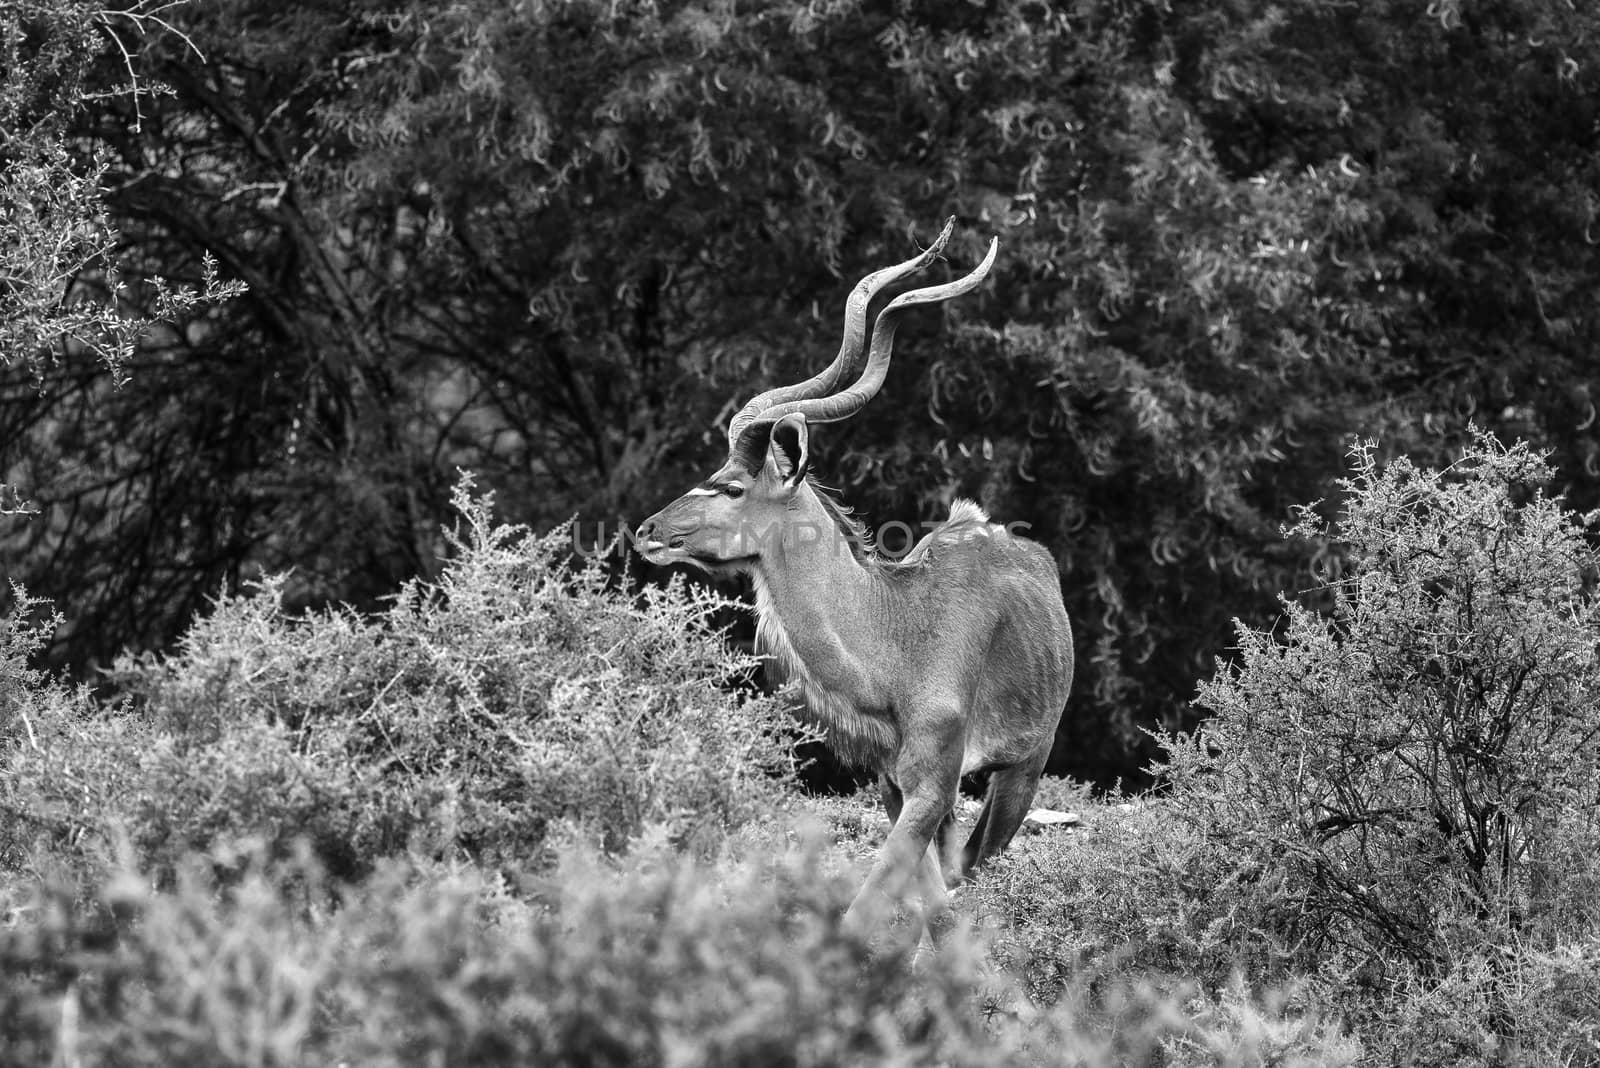 A monochrome kudu bull browsing in the Mountain Zebra National Park near Cradock in South Africa